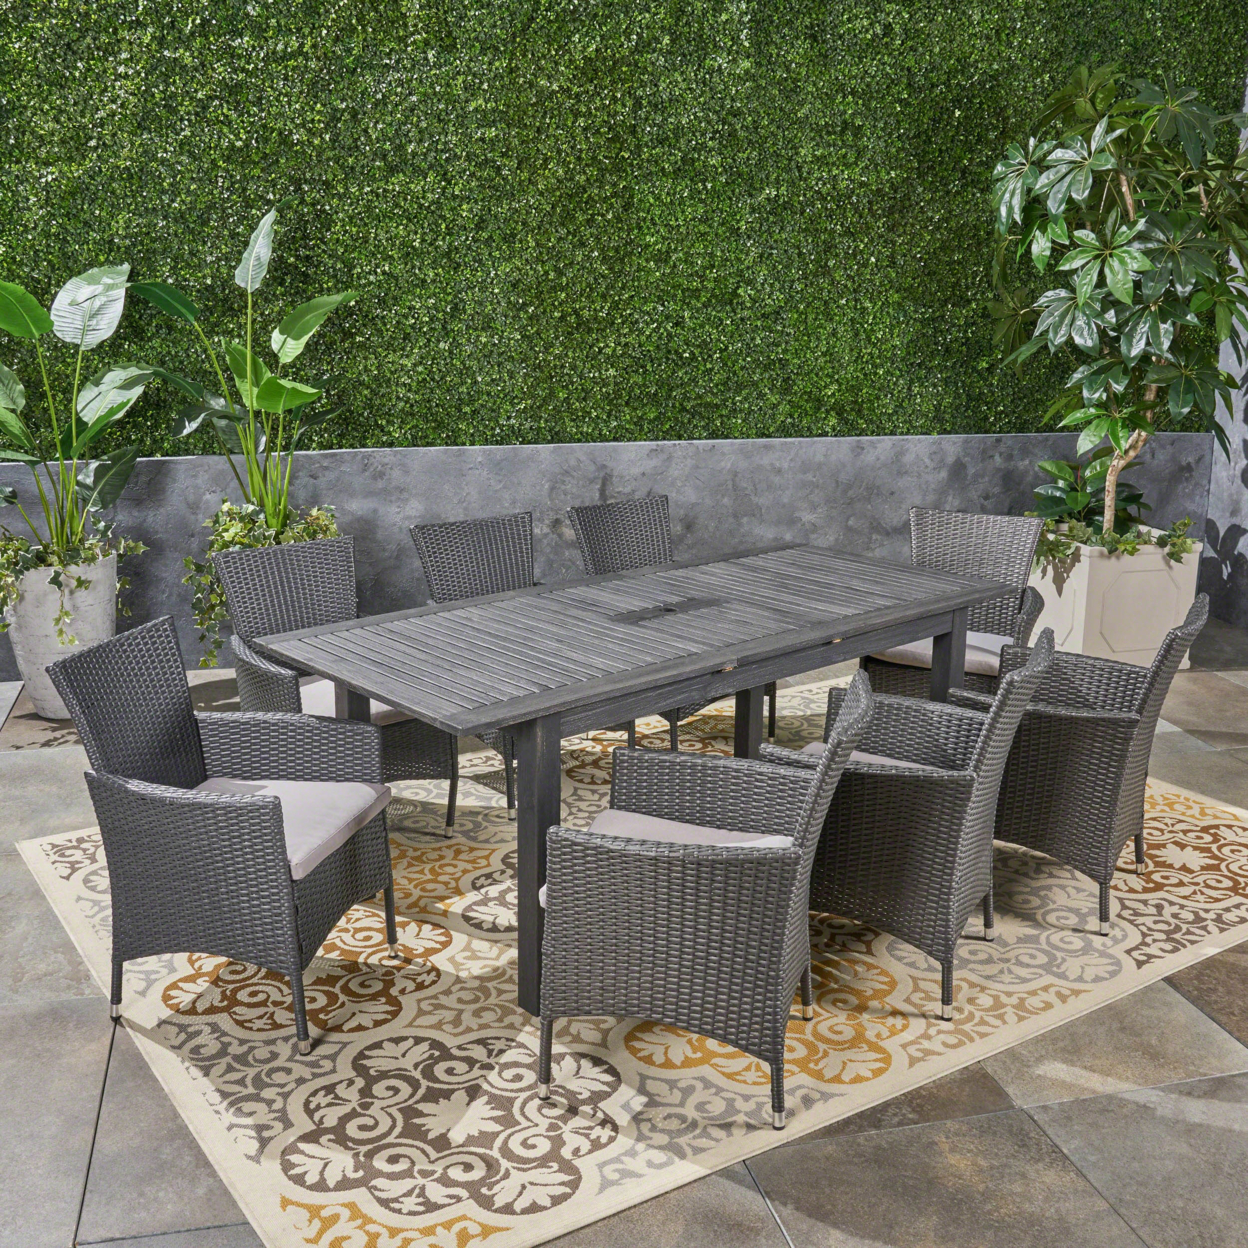 Austin Outdoor Wood And Wicker Expandable Dining Set - Dark Gray + Gray + Silver, 9-Piece Set